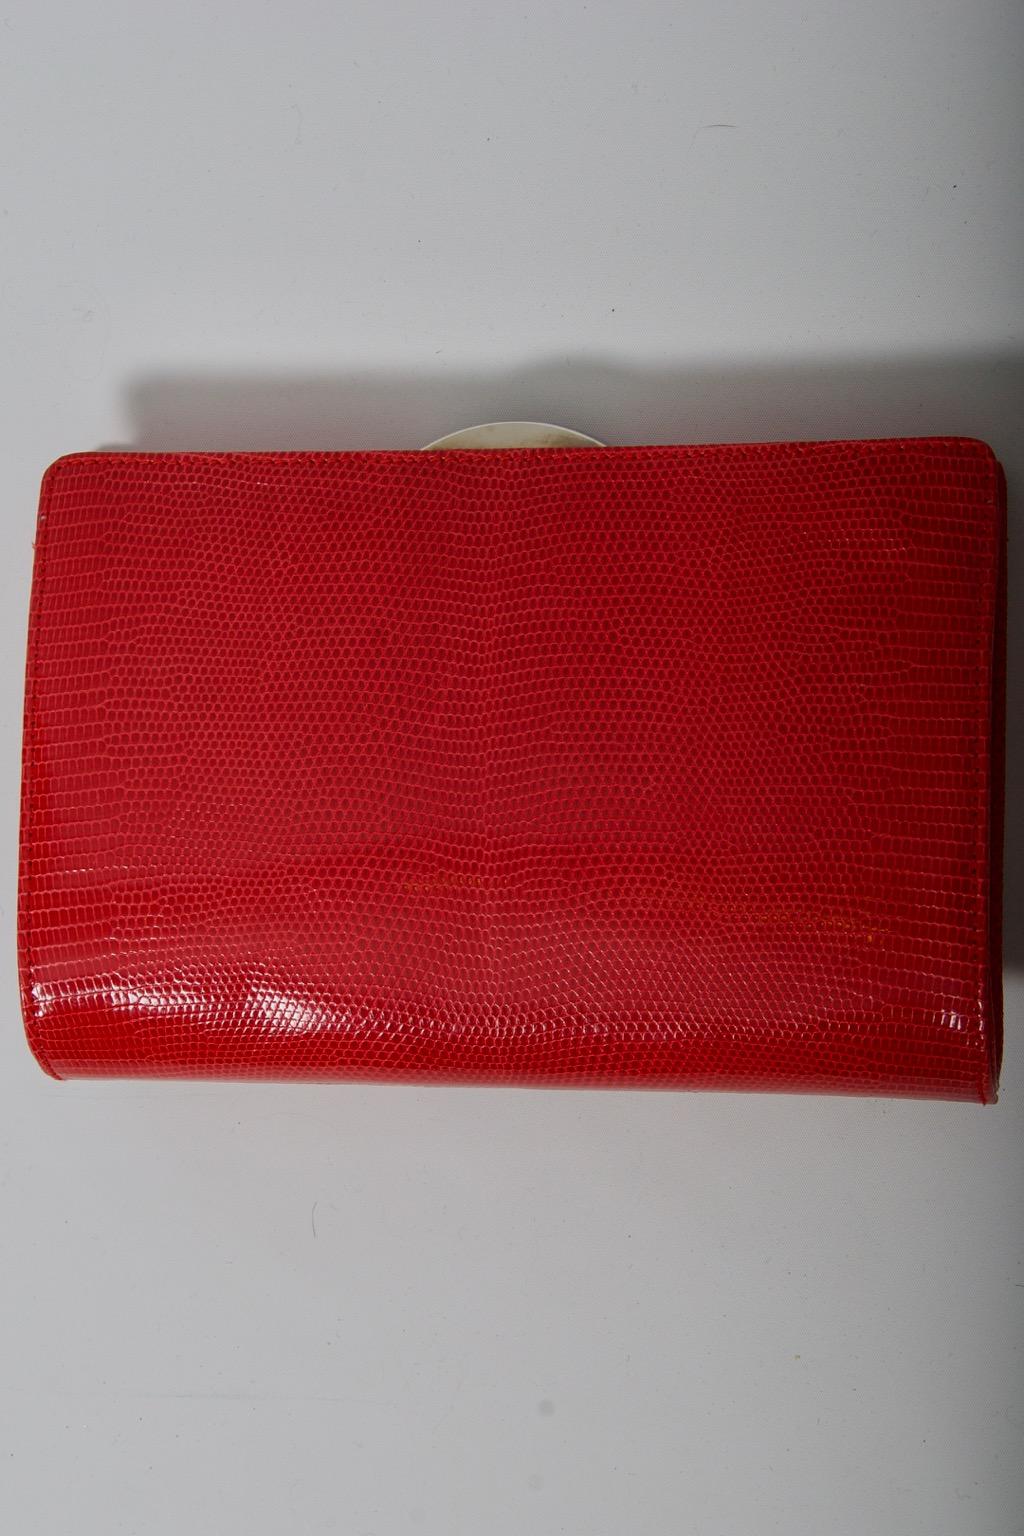 Suarez Red Lizard Covertible Clutch For Sale 1